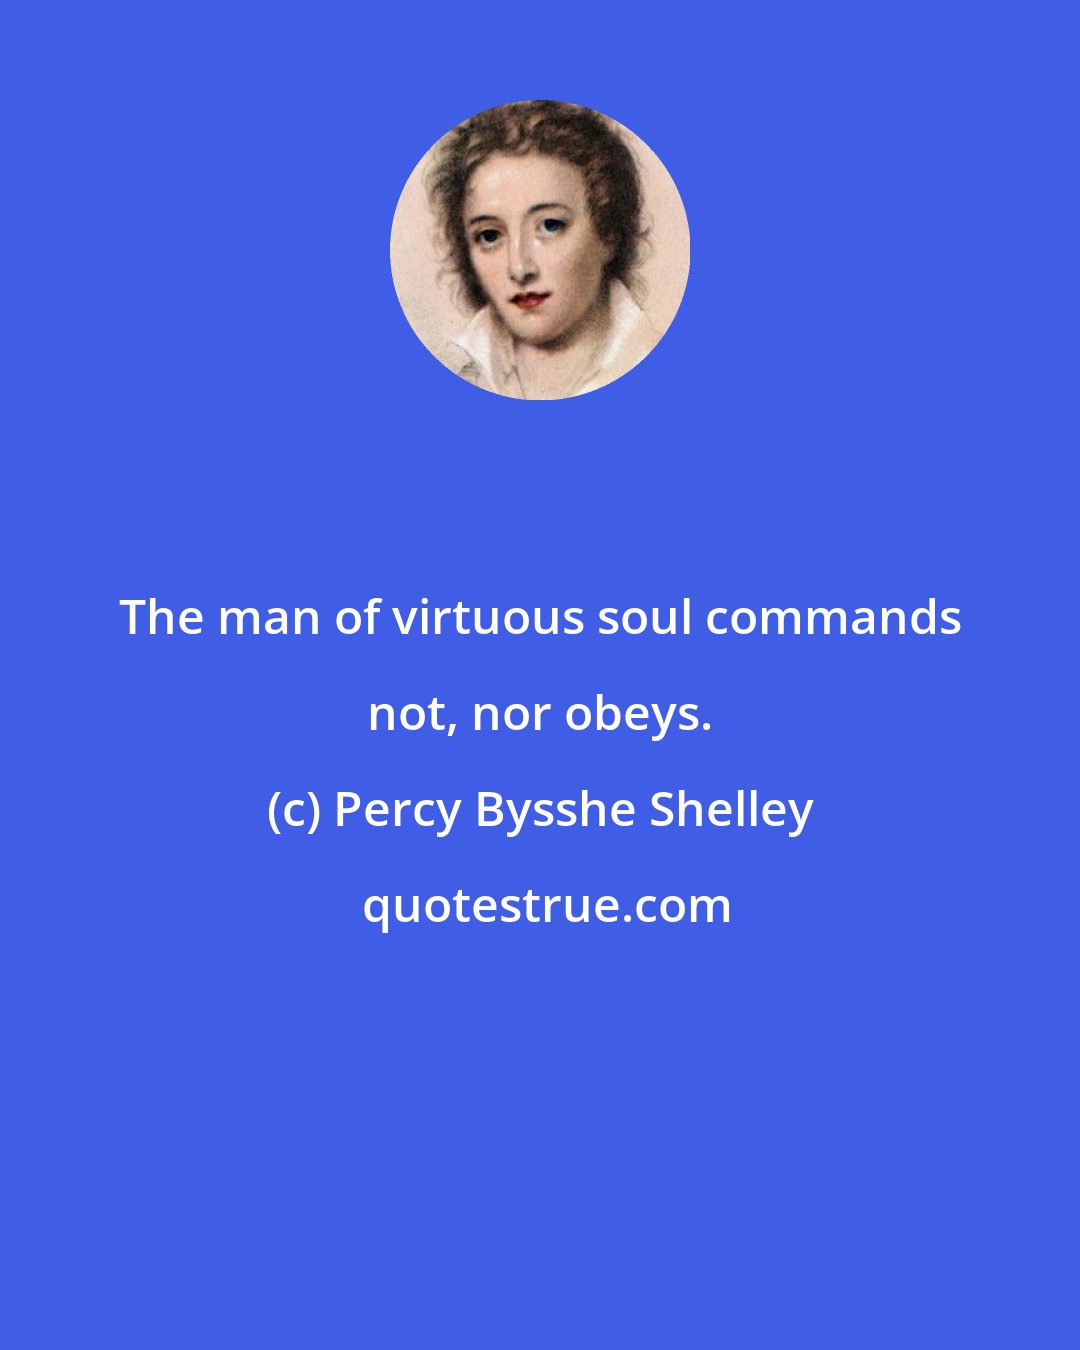 Percy Bysshe Shelley: The man of virtuous soul commands not, nor obeys.